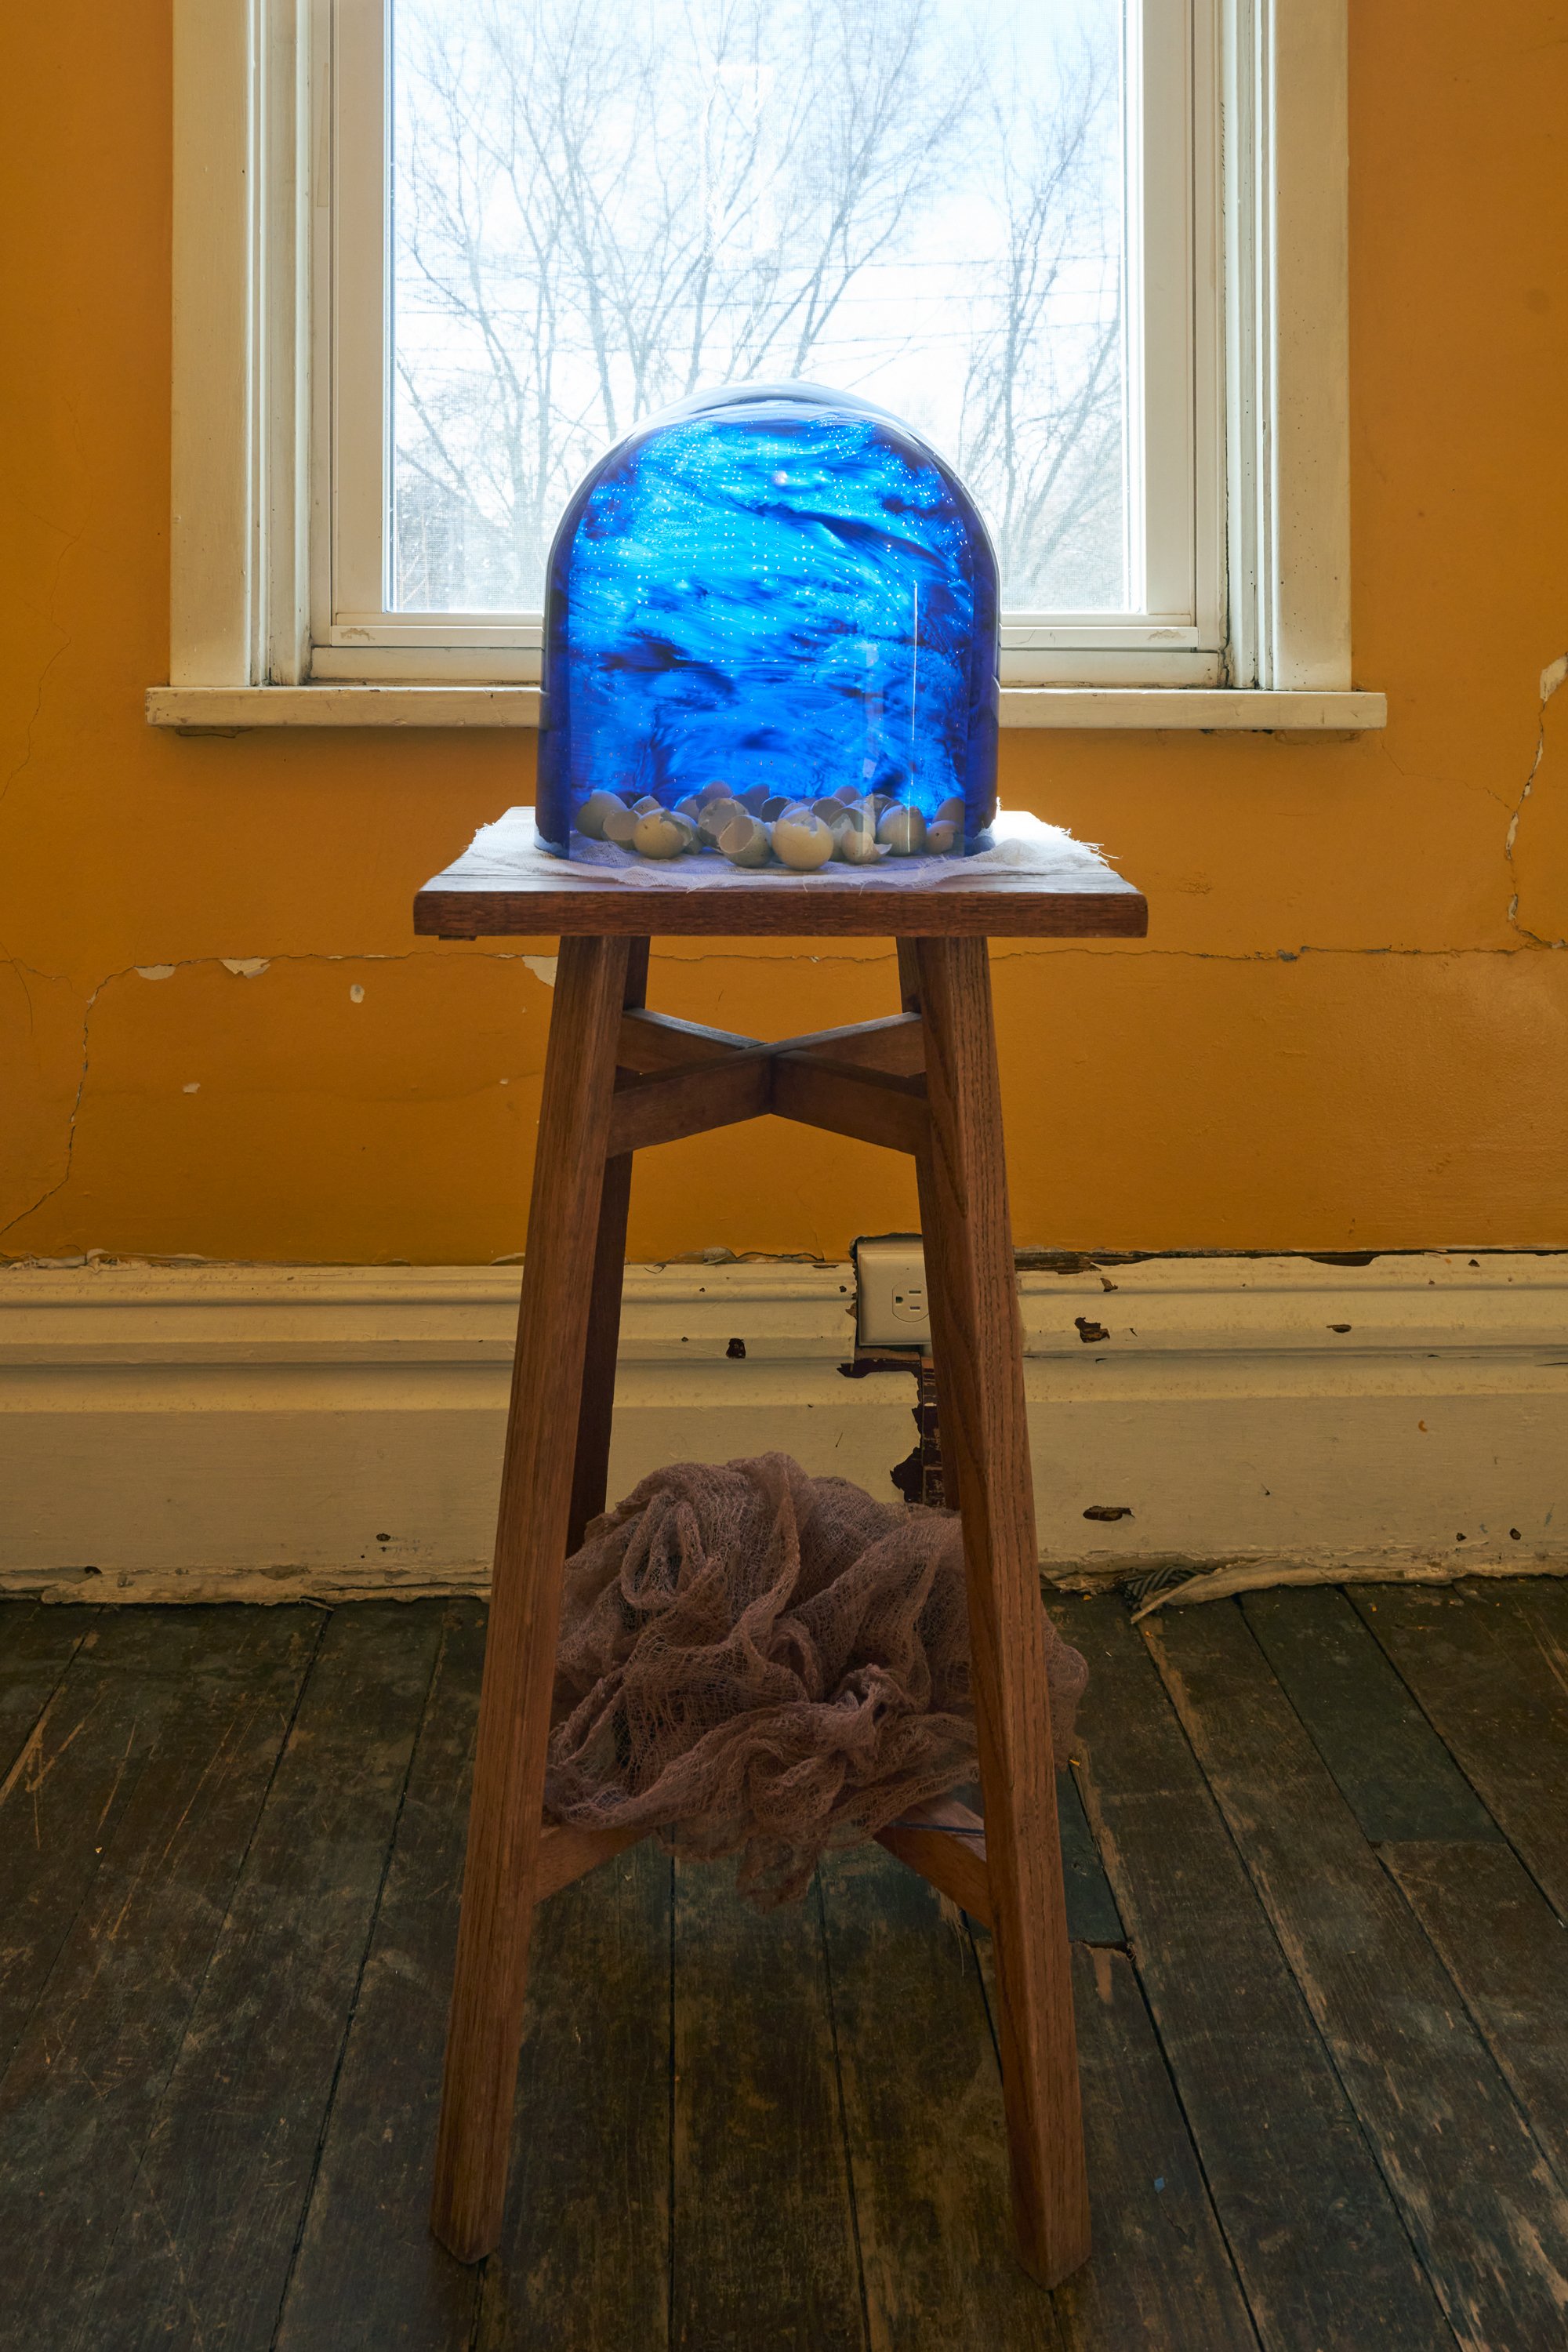   The clerk's wife claims her name, and her own night sky.  2021-2023. Acrylic paint on glass dome, celadon quail eggs, cheesecloth.  34 x 12 x 13 inches.  Installed in the golden playroom 